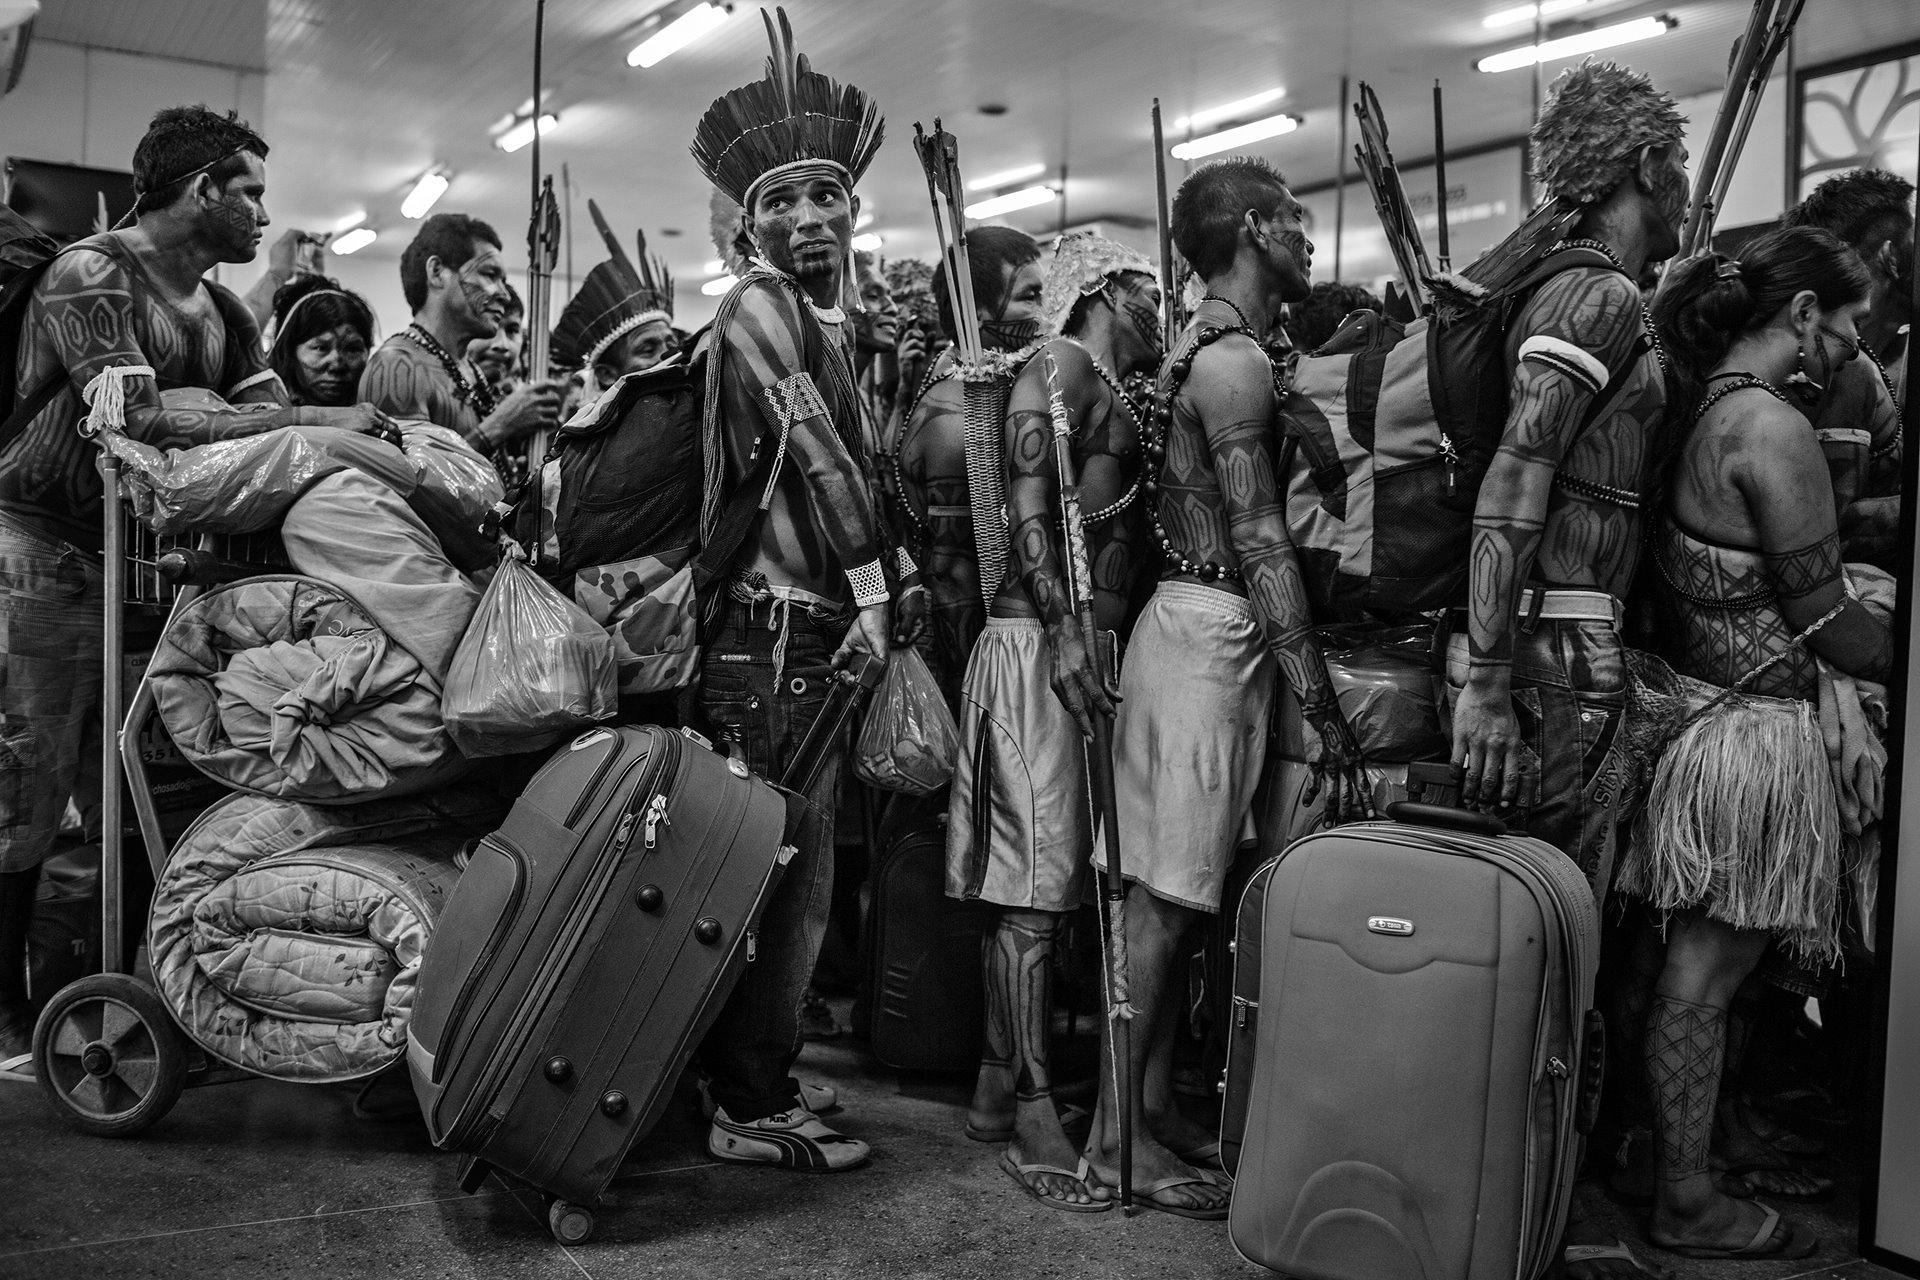 Members of the Munduruku community line up to board a plane at Altamira Airport, in Pará, Brazil. After protesting at the site of the construction of the Belo Monte Dam on the Xingu River, they traveled to the national capital Brasilia to present their demands to the government. The Munduruku community inhabit the banks of another tributary of the Amazon, the Tapajos River, several hundred kilometers away, where the government has plans to build further hydroelectric projects. Despite pressure from indigenous people, environmentalists and non-governmental organizations, the Belo Monte project was built and completed in 2019.